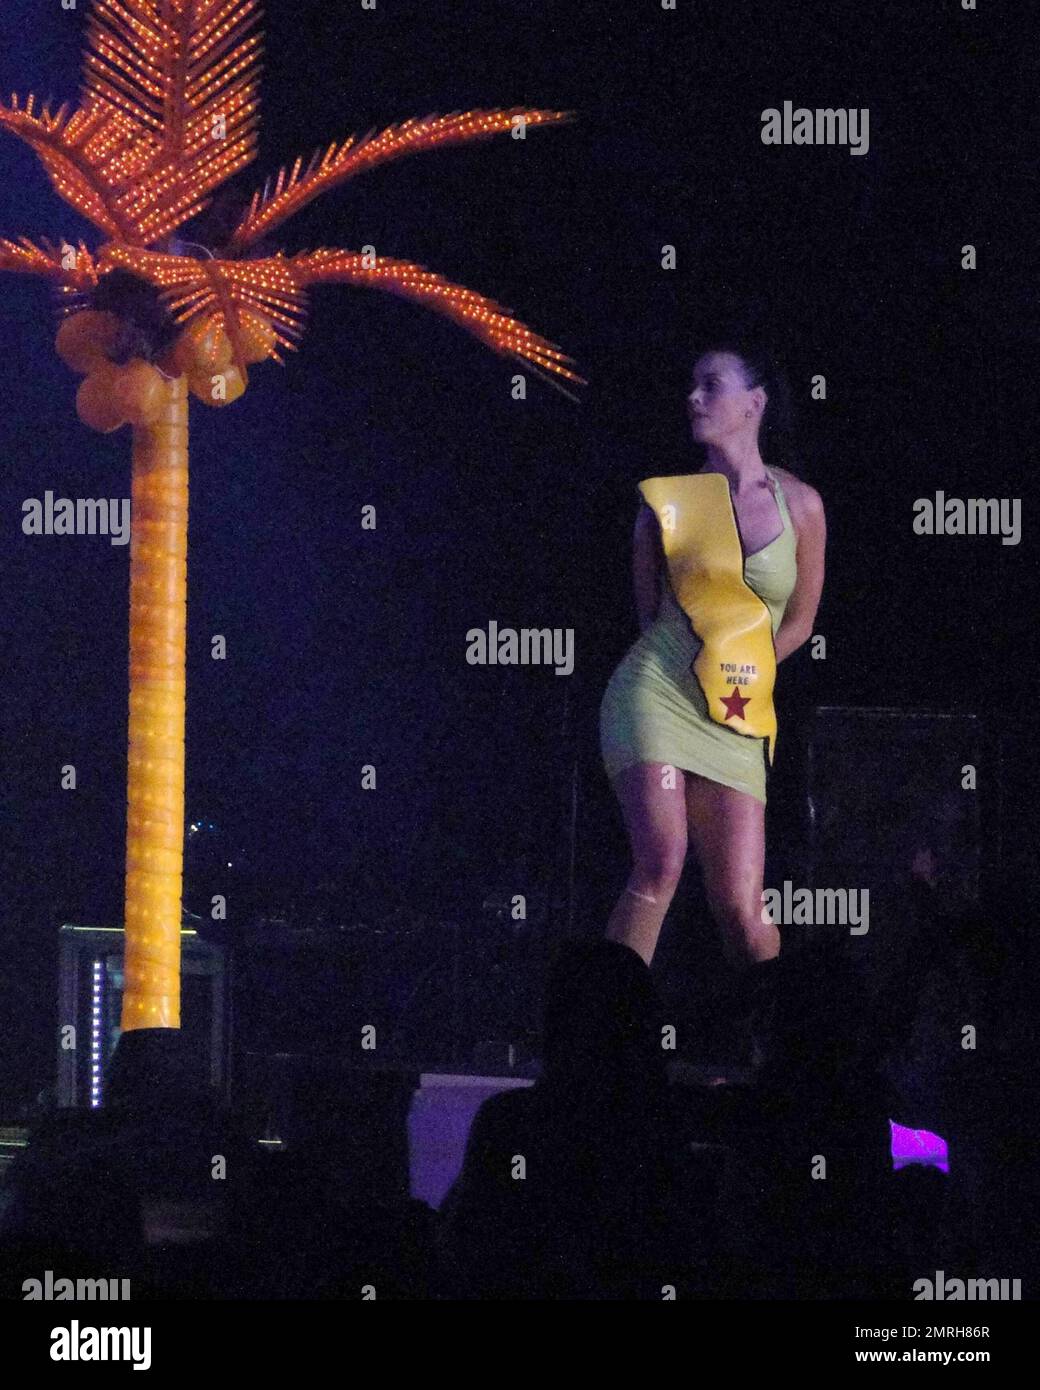 International singer-songwriter Katy Perry performs live at Atlantis Paradise Island in the Grand Ballroom.  Perry performed to Atlantis guests wearing a lime green rubber dress adorned with a yellow map  of what appeared to be California State and a 'you are here' red star.   In true Perry style the stage was decked out with Neon Palm Trees and bouncing beach balls for the crowd.  Perry releases her new album 'Teenage Dream' in August which features her top ten single 'California Gurls' which is the fastest rising single to Top 10 radio in over four years.  Bahamas  7/17/2010 Stock Photo